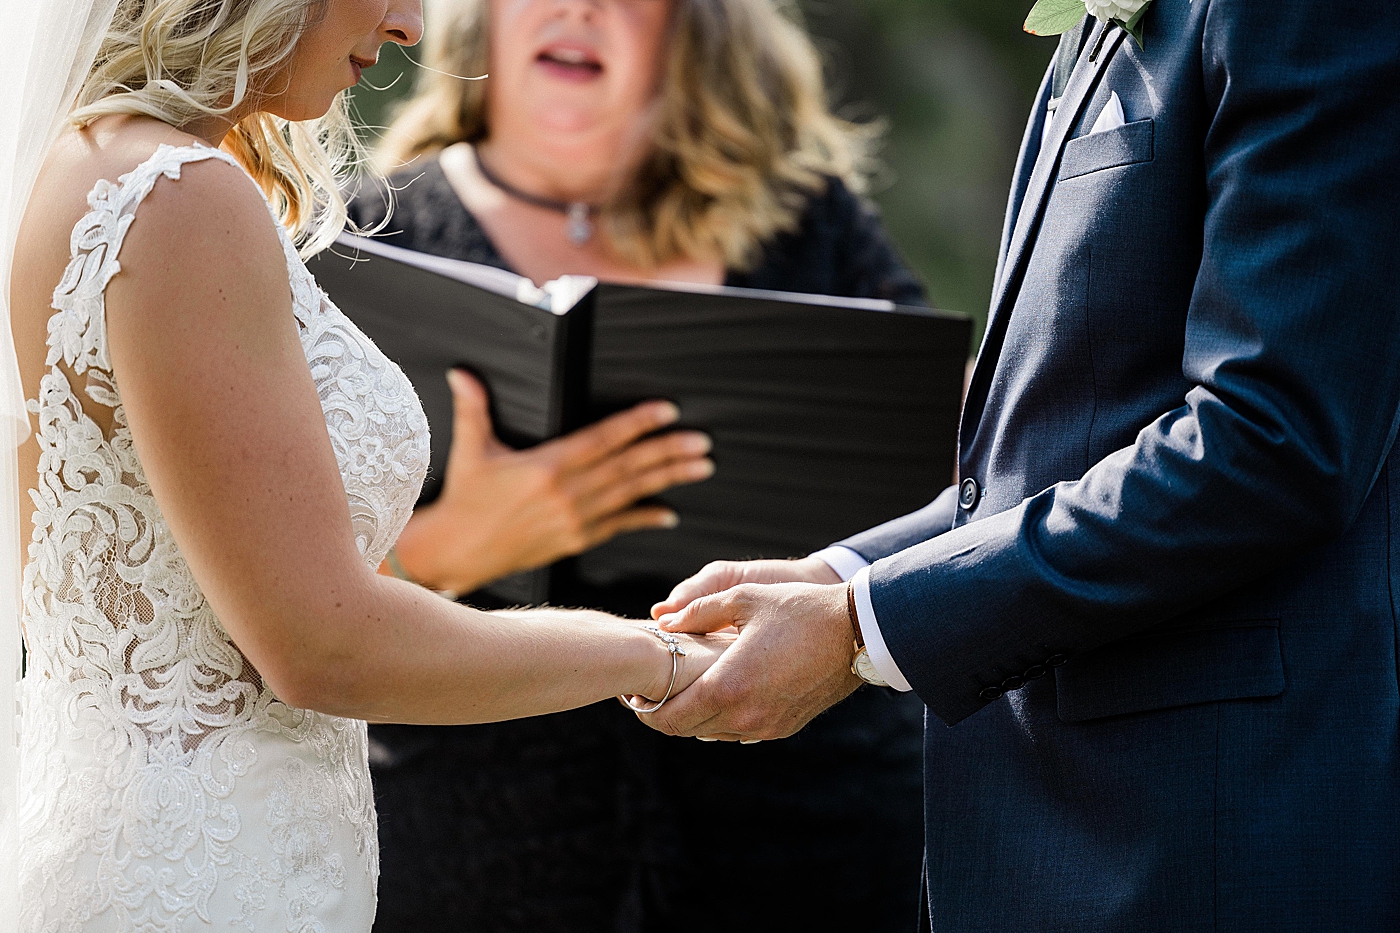 Bride and groom exchange vows during intimate elopement ceremony. Photo by Megan Montalvo Photography.